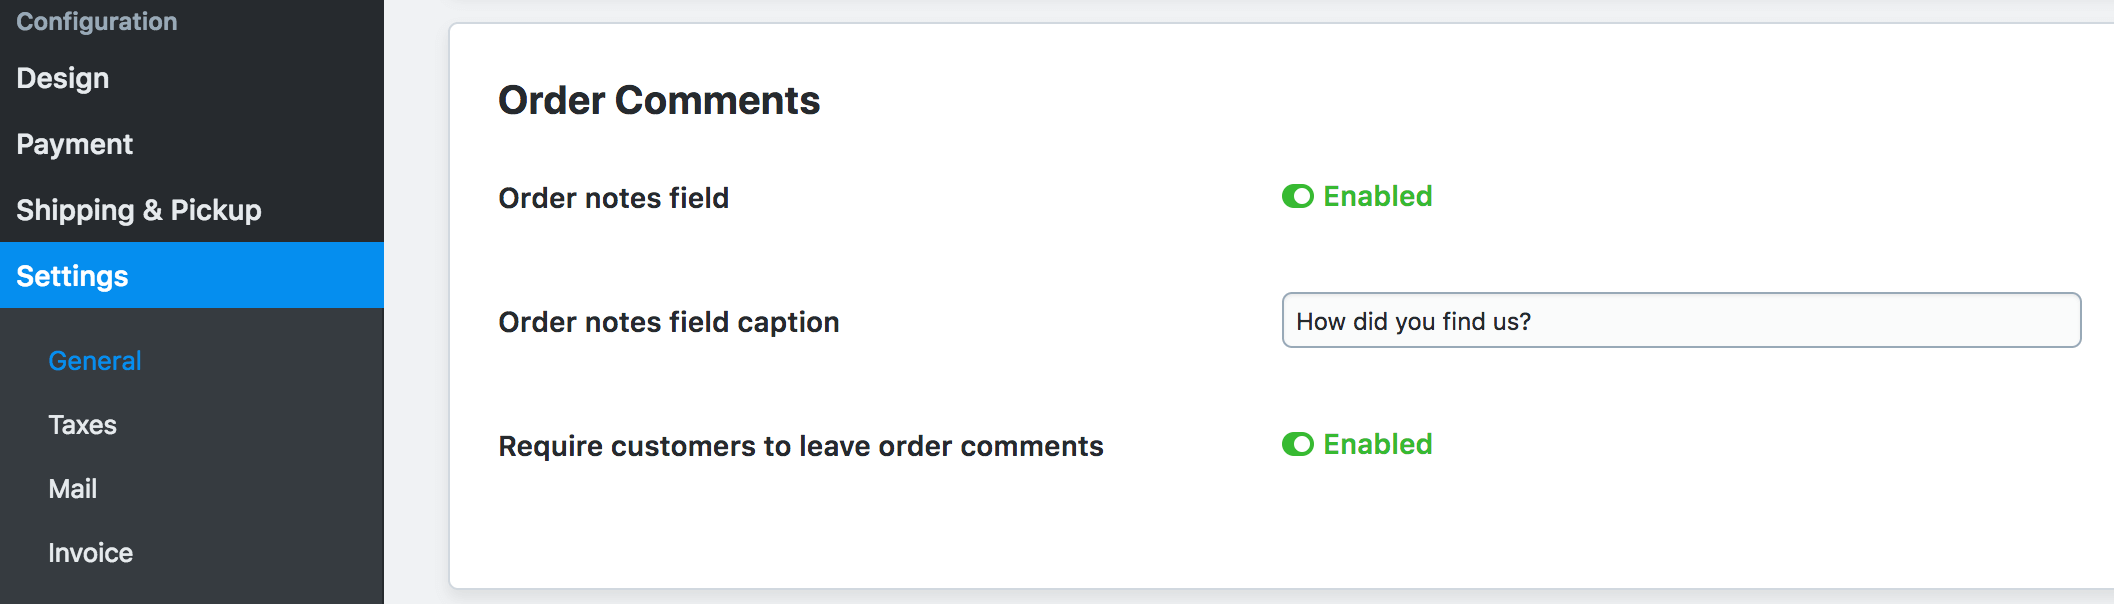 Order comments